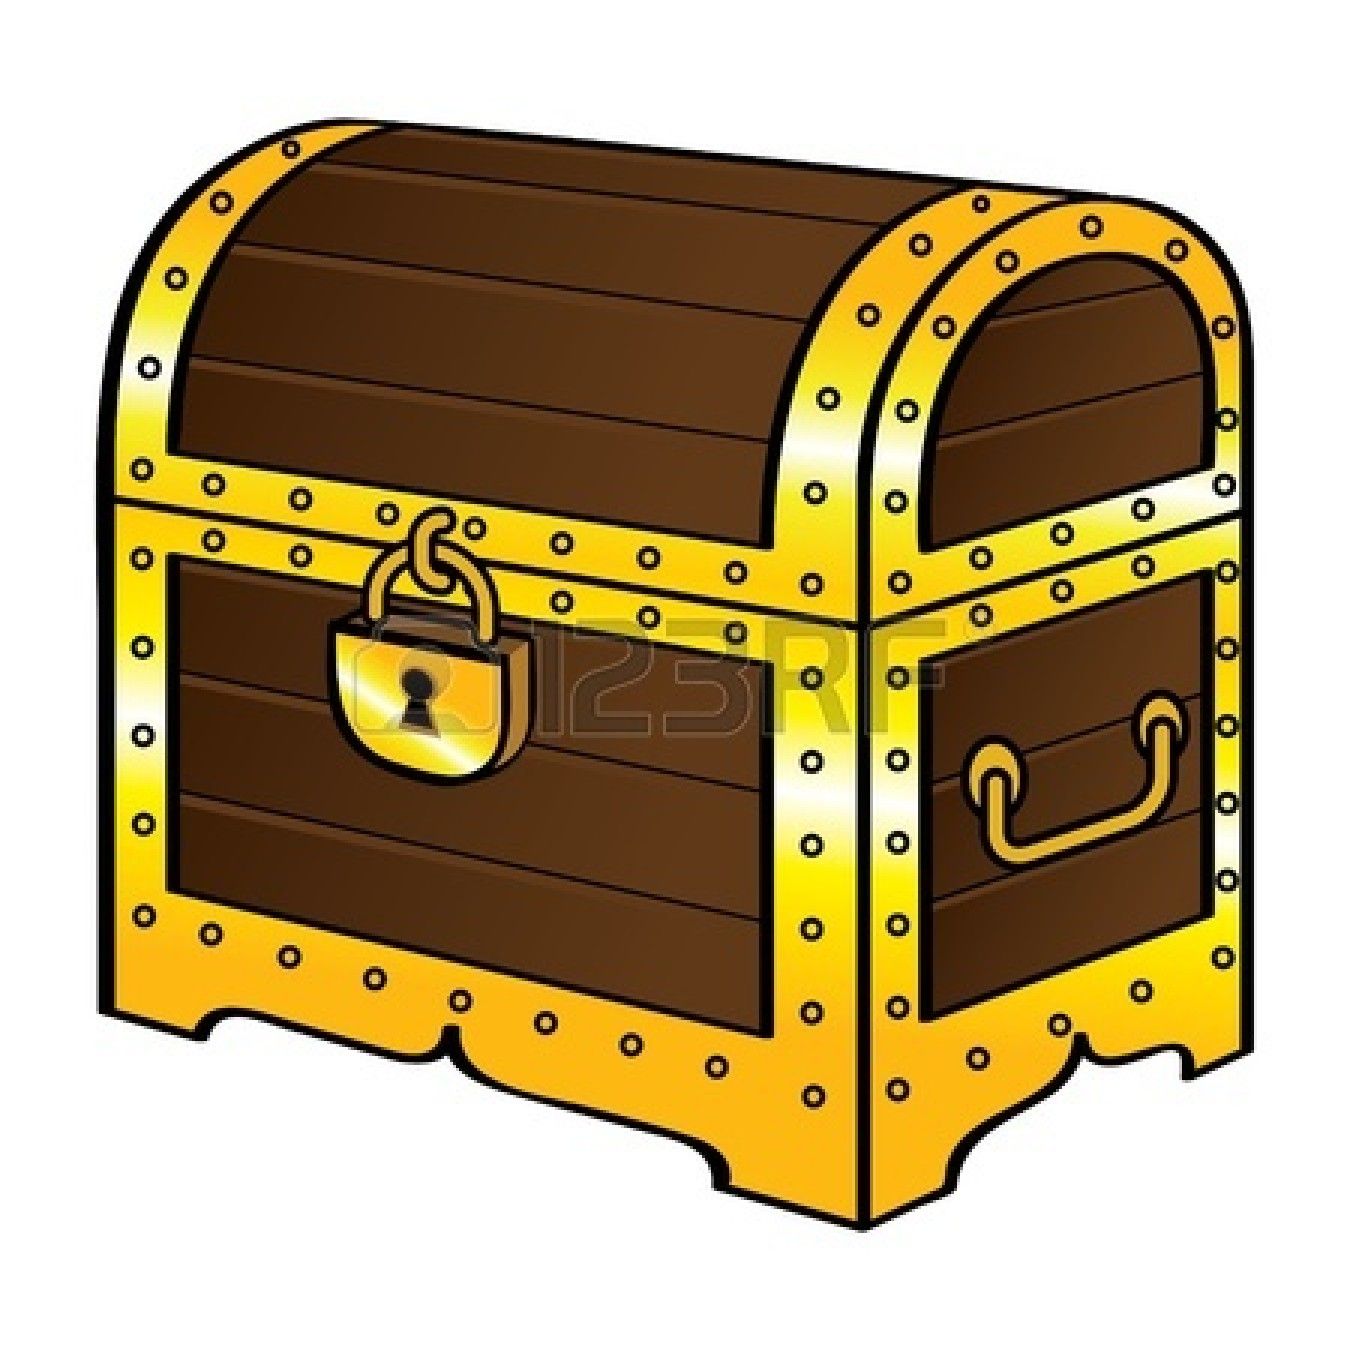 Treasure Chest Stock Vector Illustration And Royalty Free